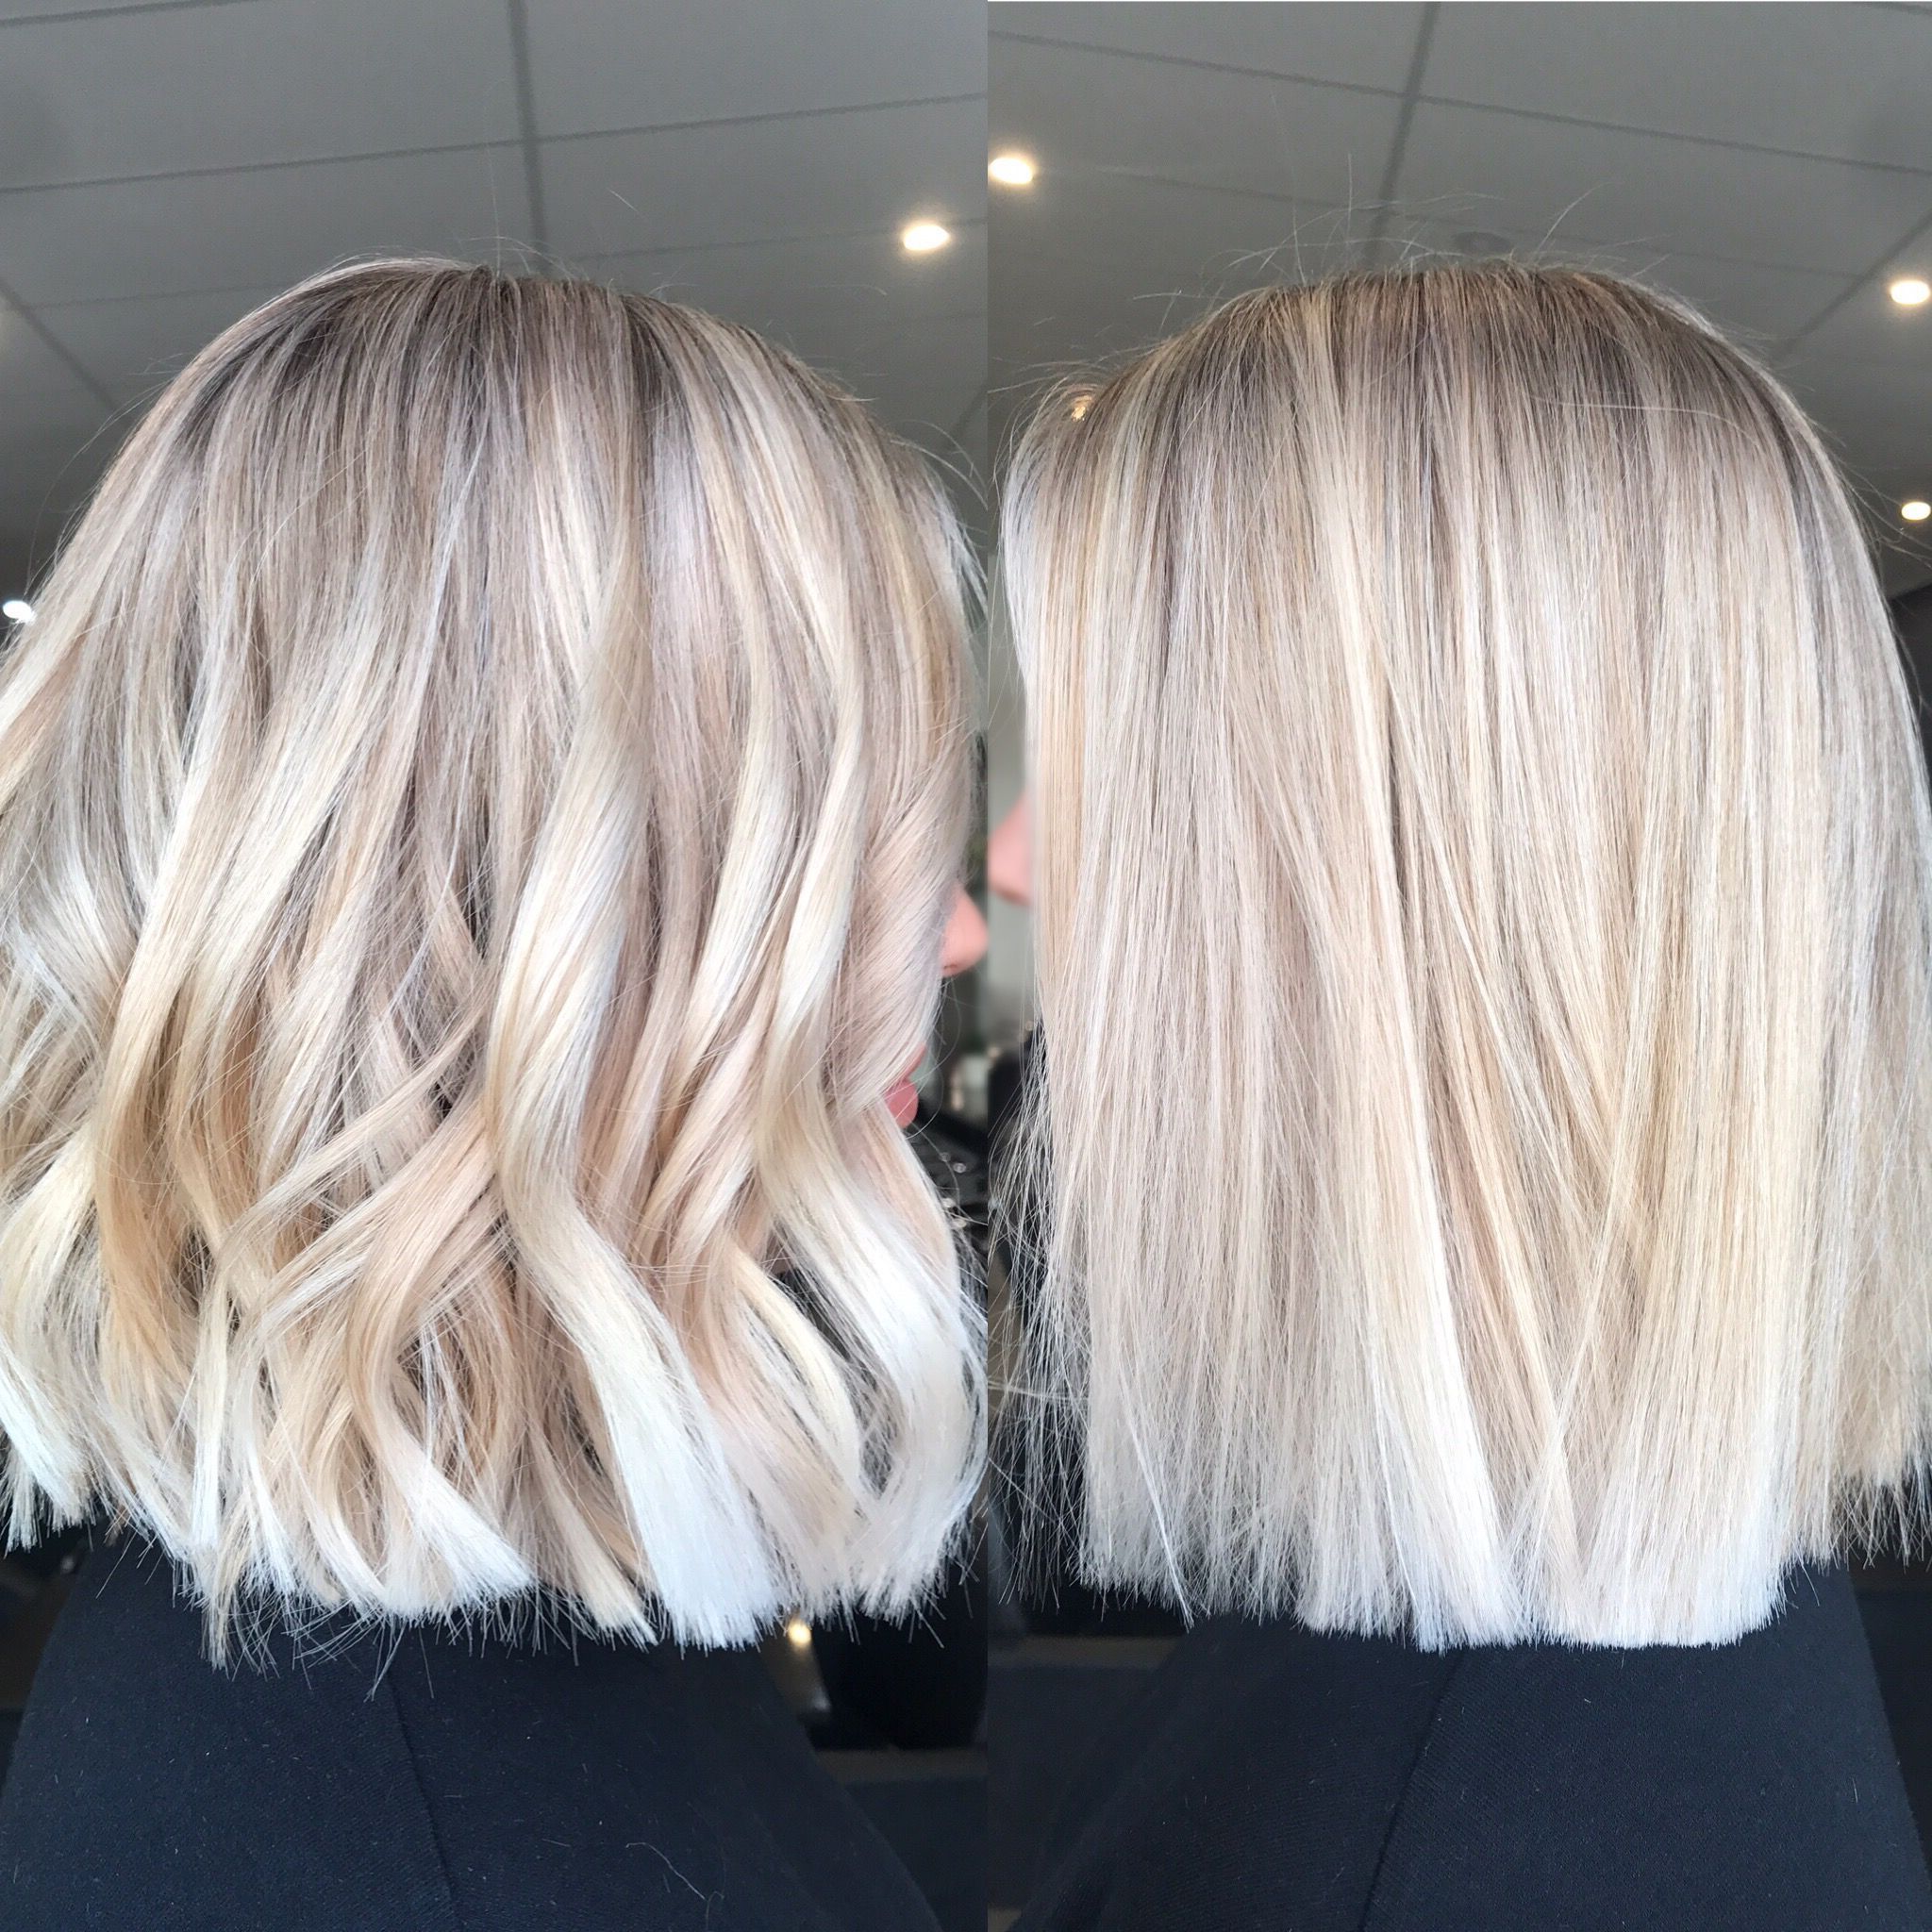 Most Current Textured Bronde Bob Hairstyles With Silver Balayage For Pin On Coiffure (View 7 of 20)